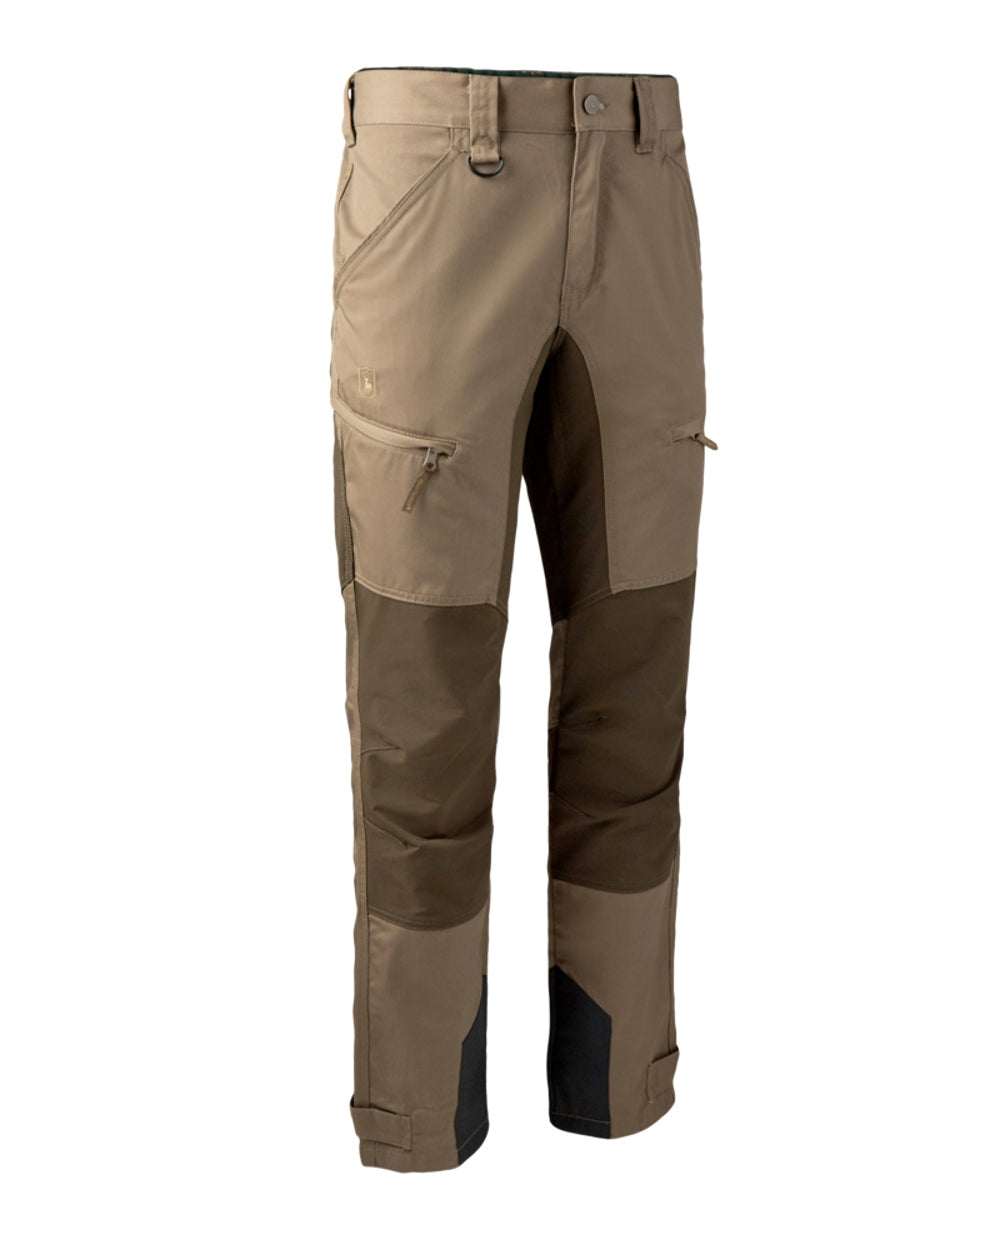 Deerhunter Rogaland Contrast Stretch Trousers in Driftwood 